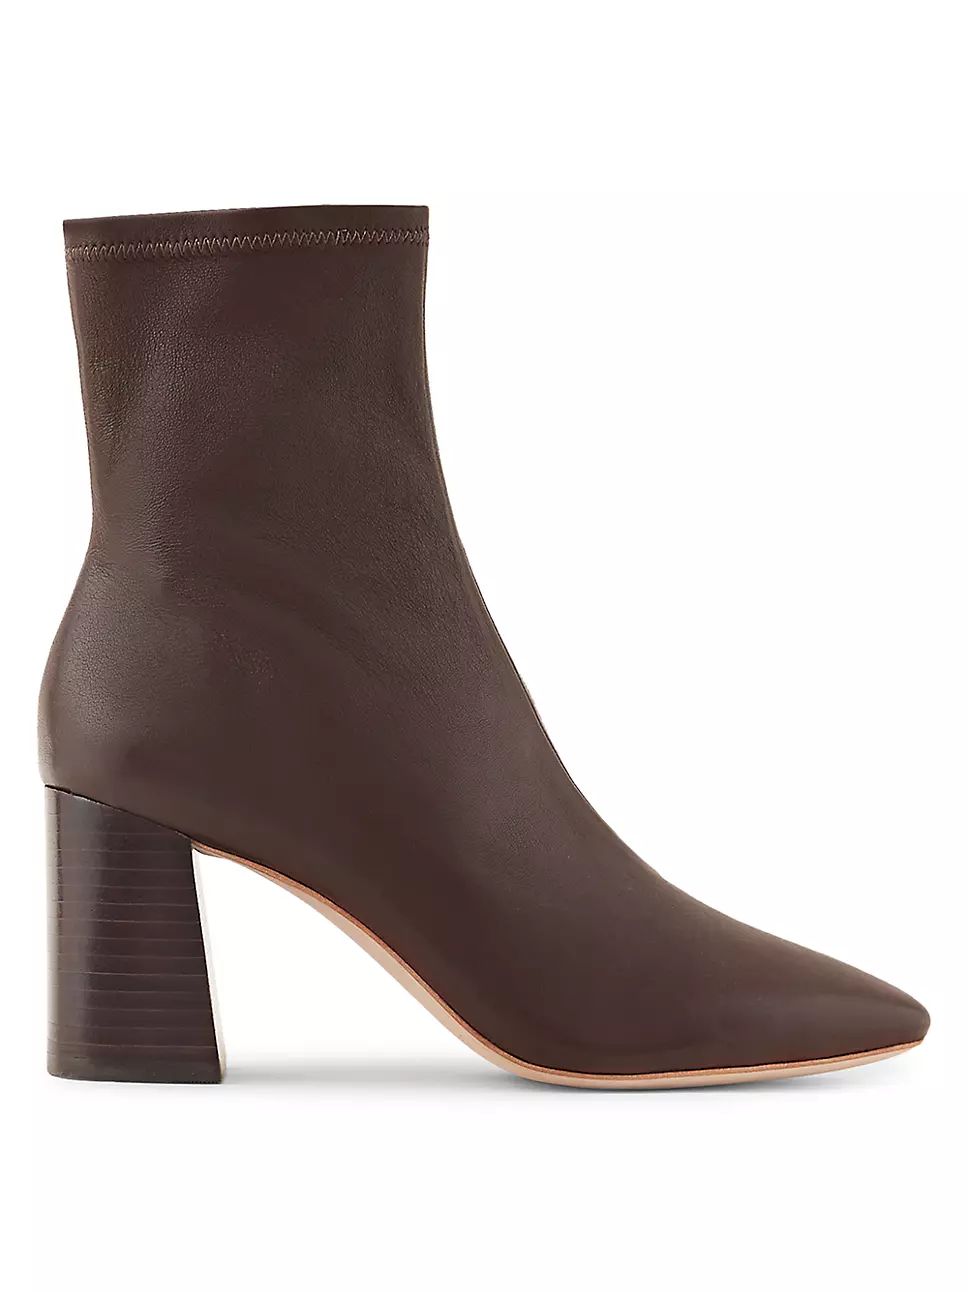 Elise Leather Ankle Boots | Saks Fifth Avenue